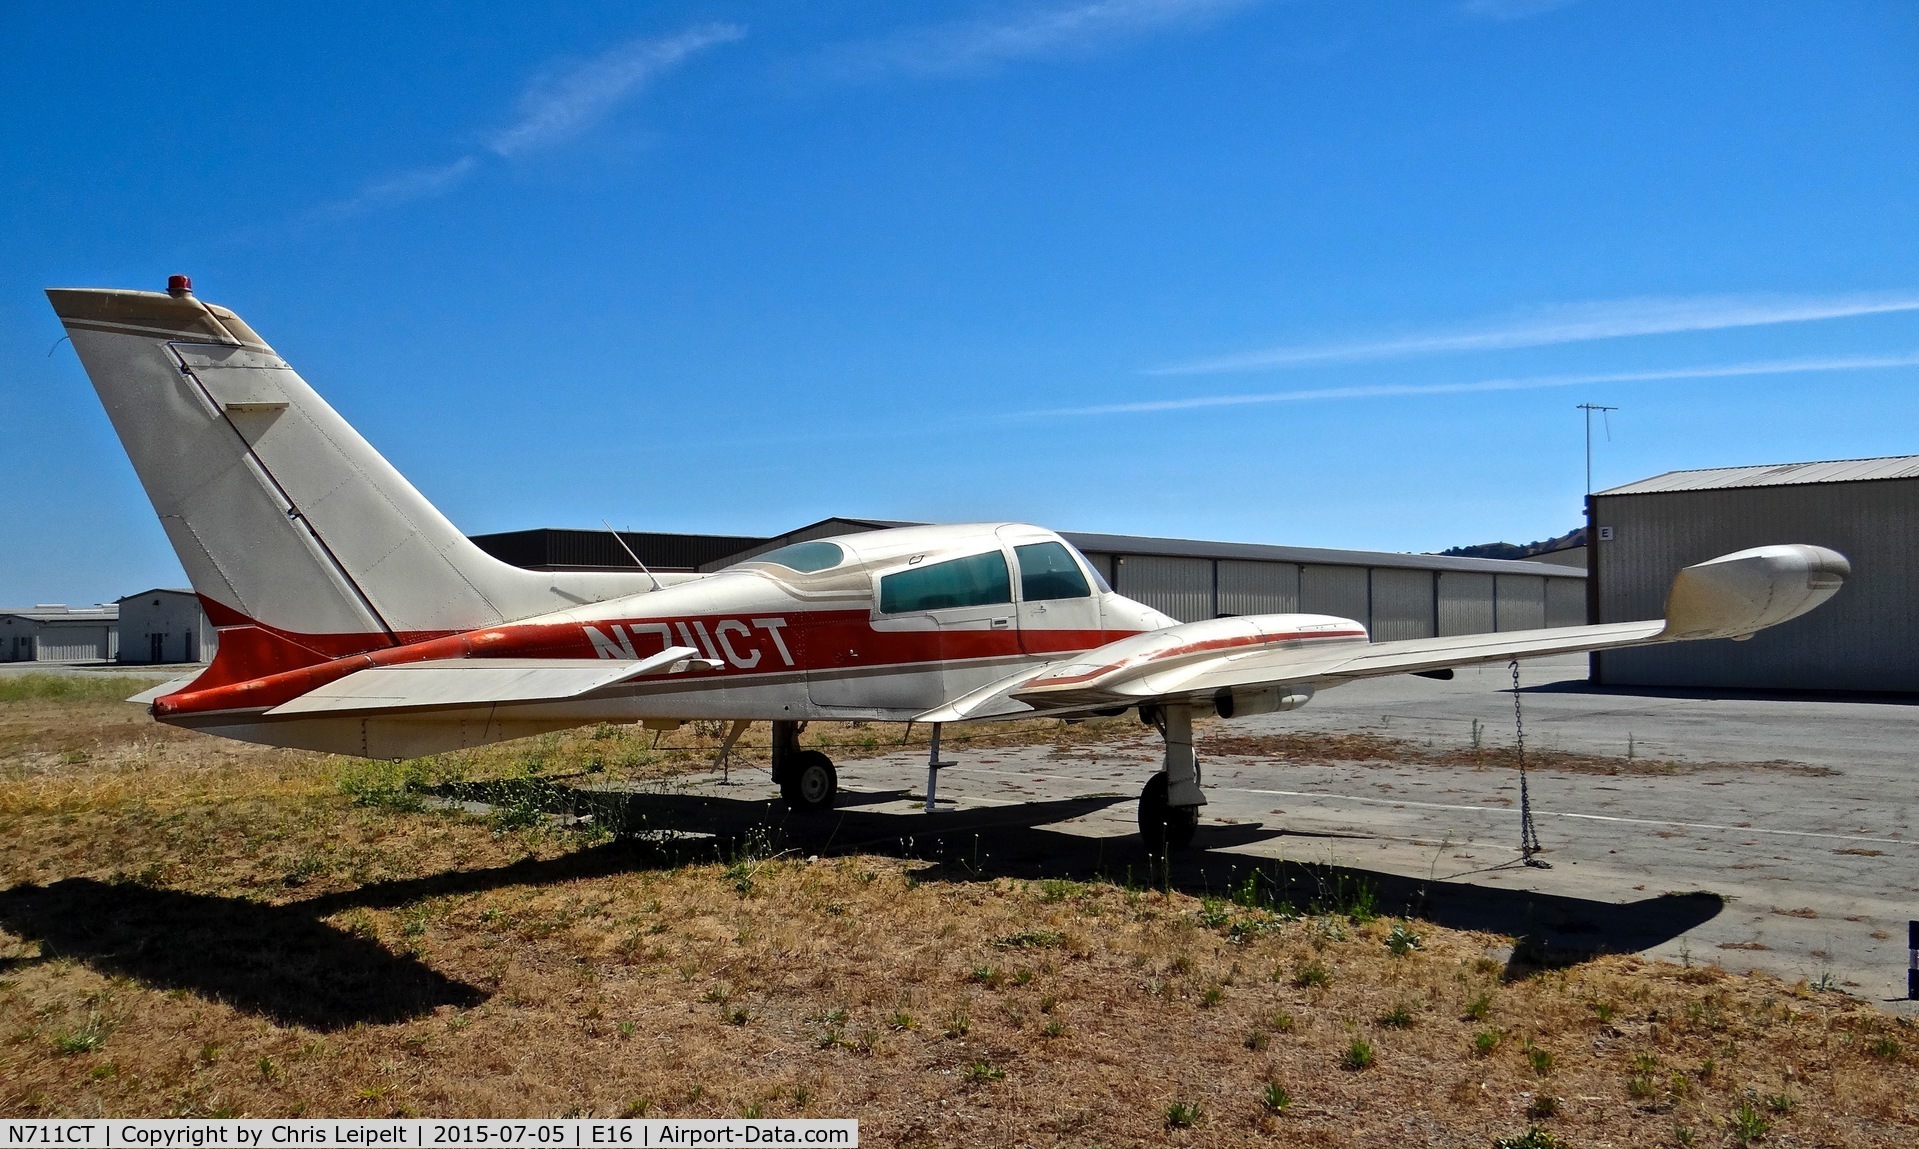 N711CT, 1973 Cessna 310Q C/N 310Q0677, Locally-based 1973 Cessna 310Q sitting at its tie down at South County Airport, San Martin, CA. It has been for sale for quite some time.